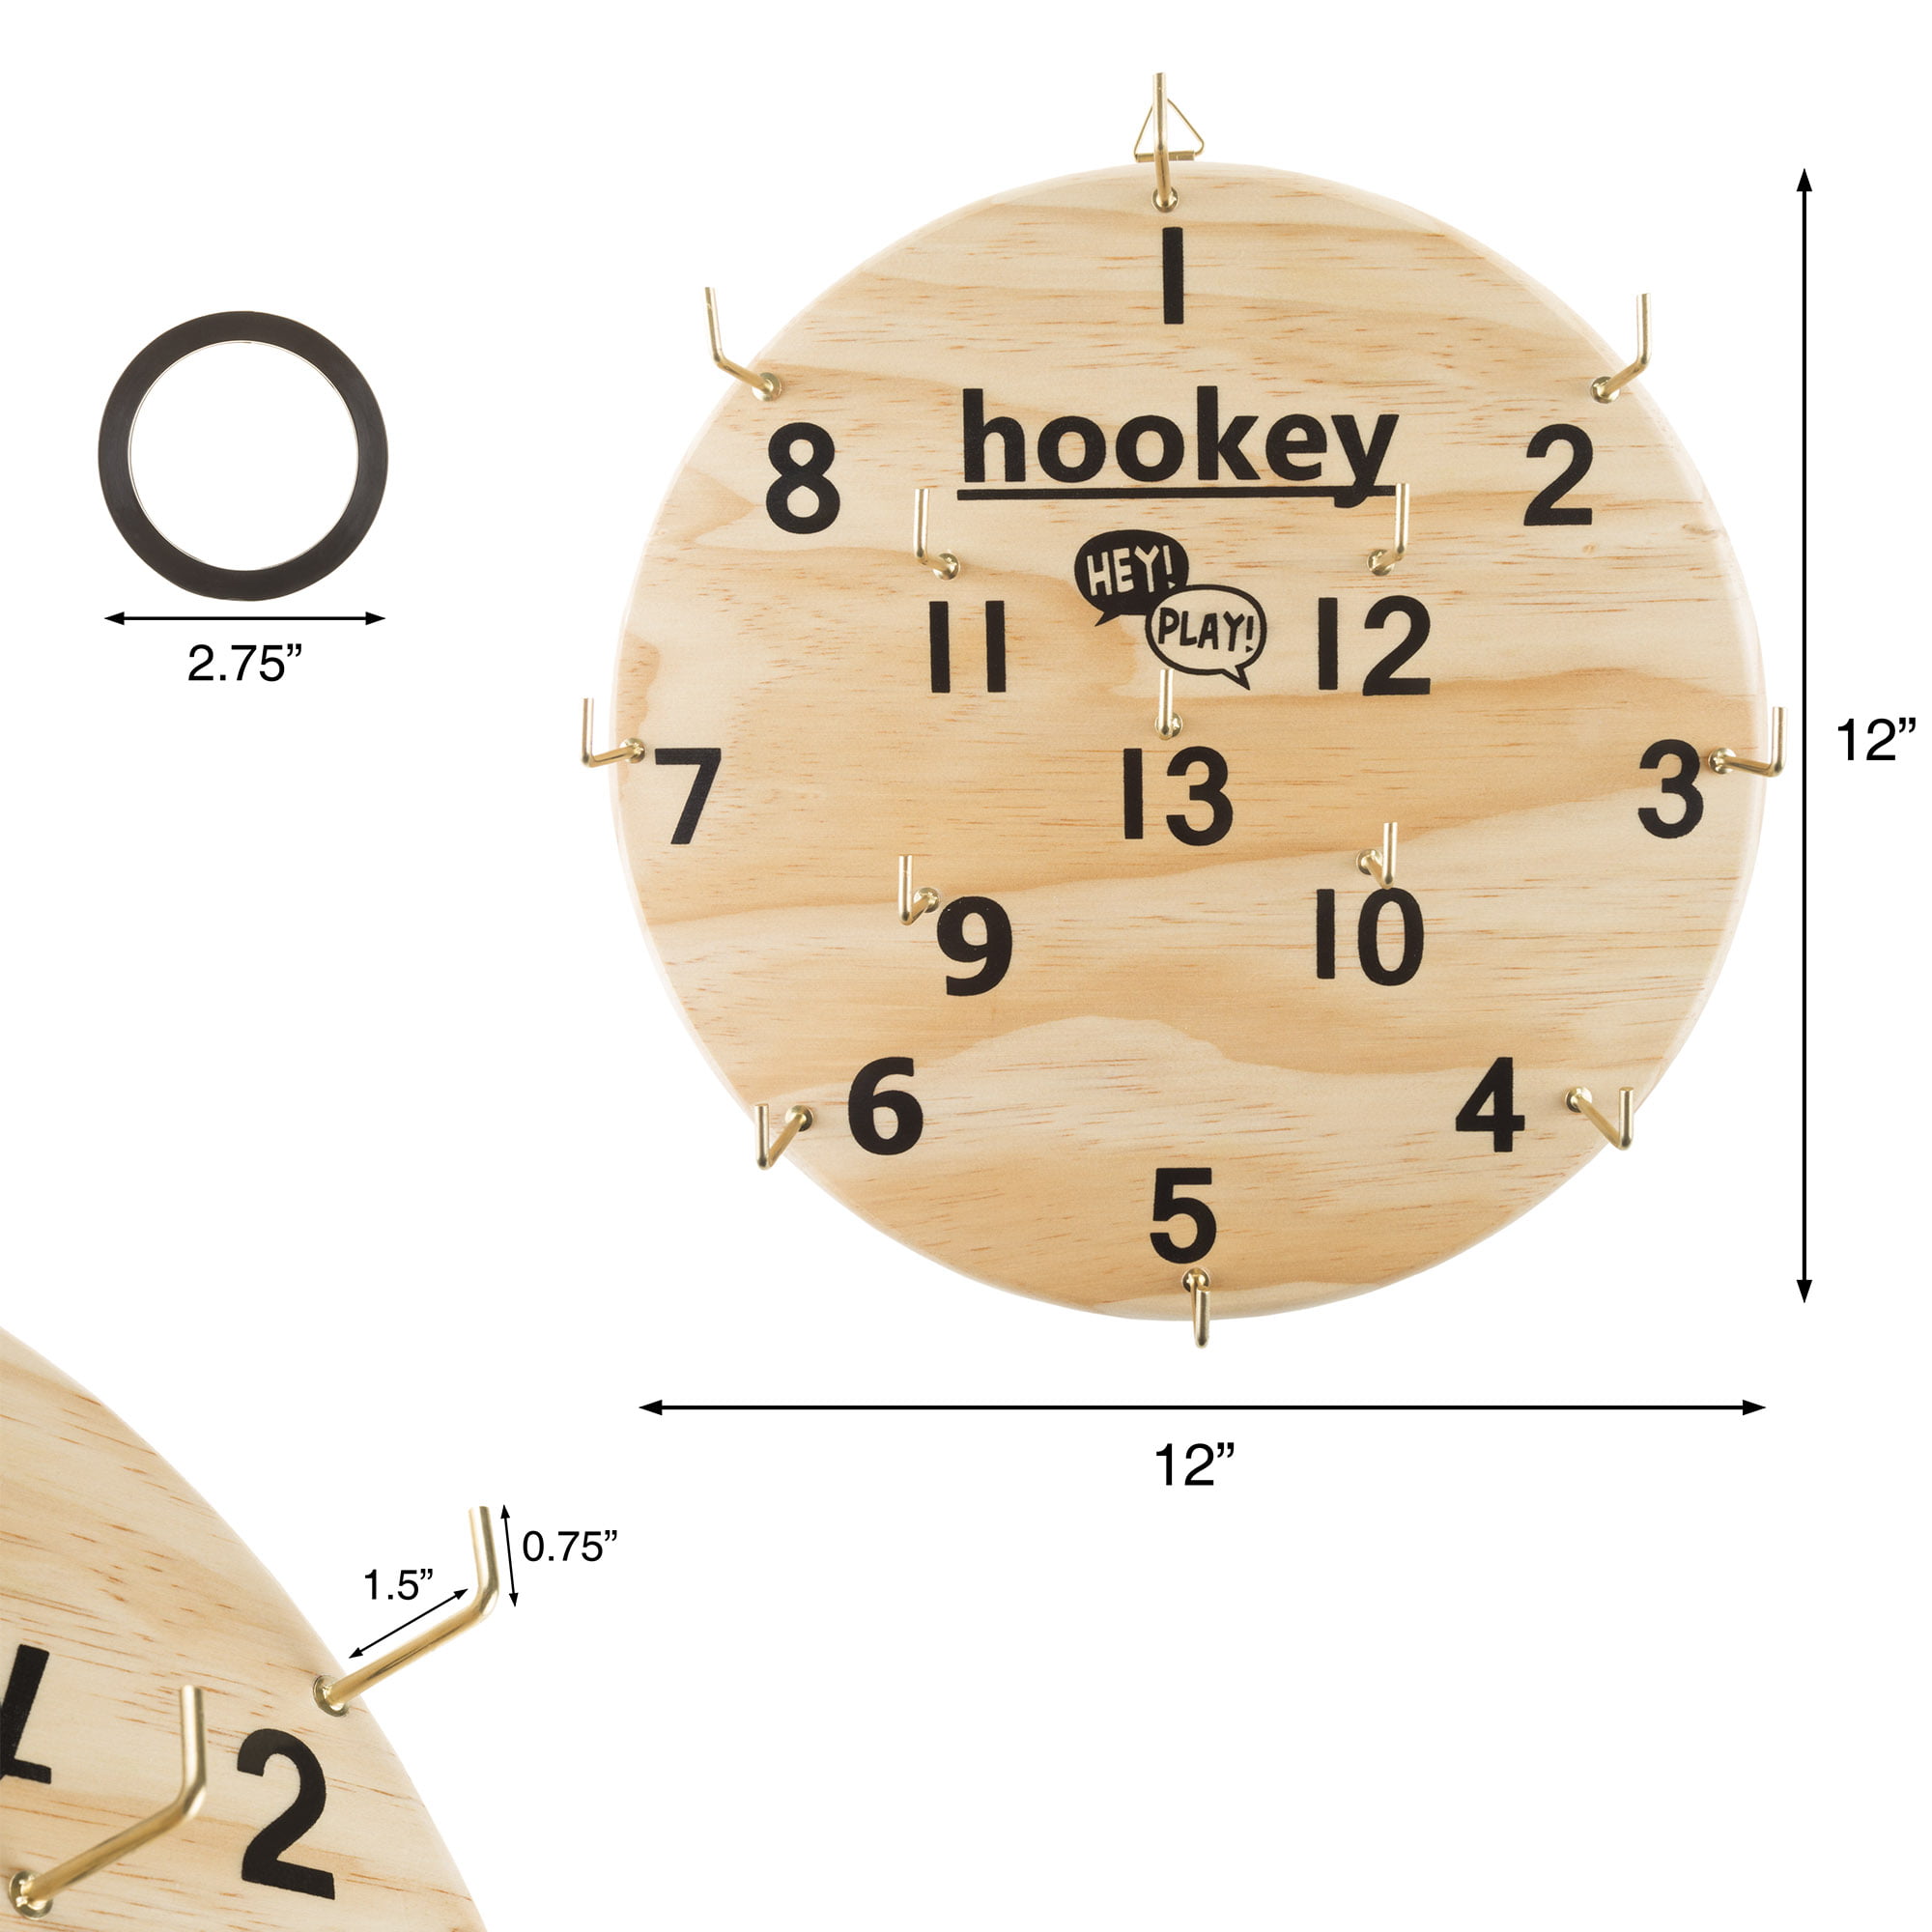 Hookey Ring Toss Game Set for Outdoor or Indoor Play, Safe Alternative to  Darts by Hey! Play! 